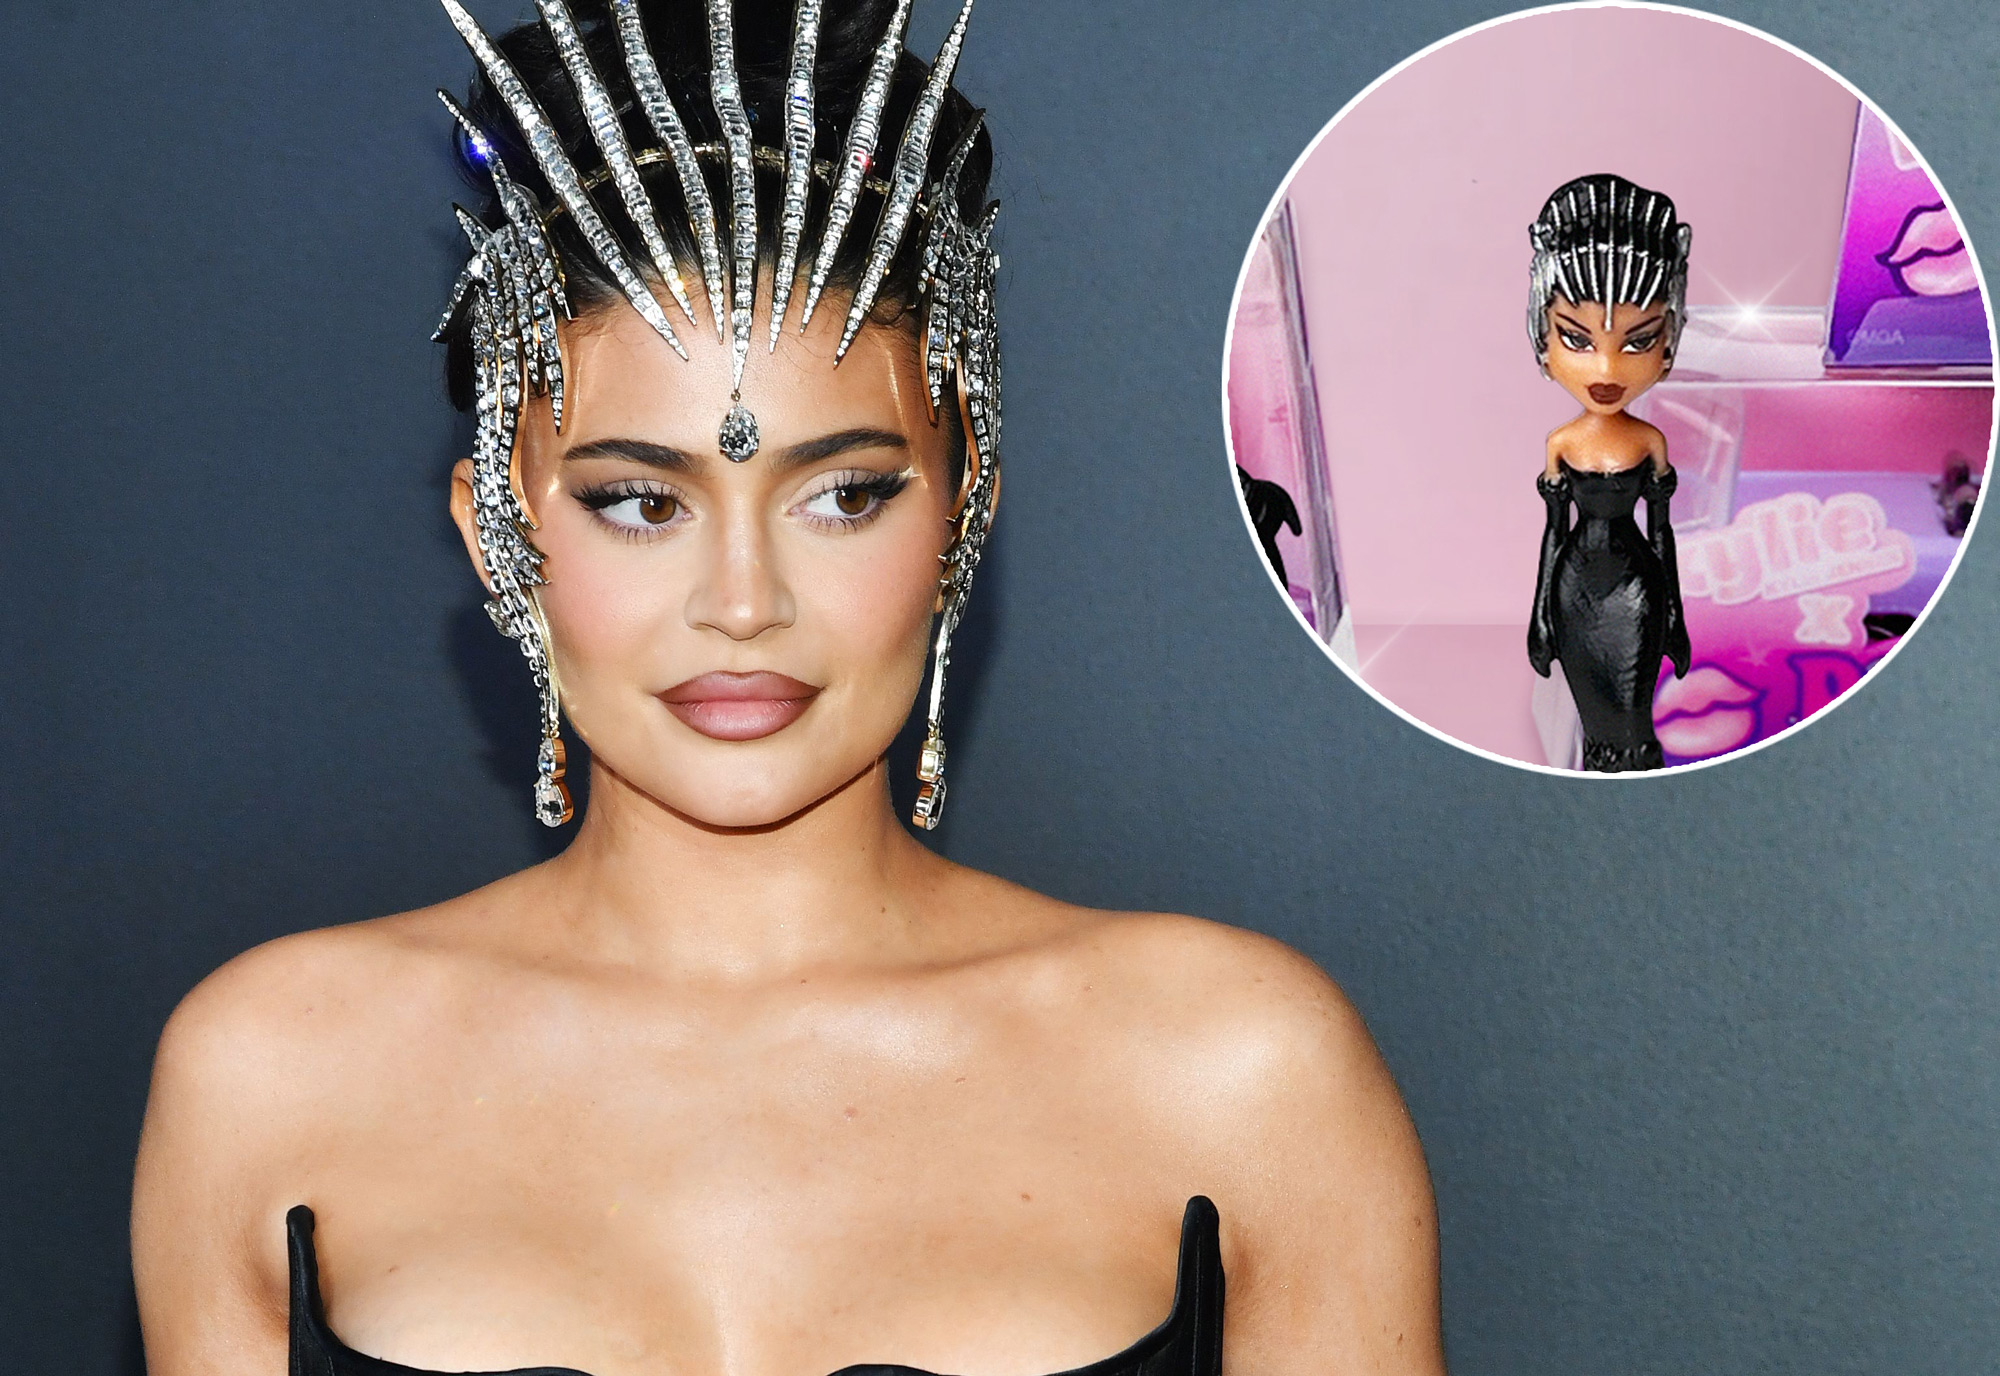 Kylie Jenner Teams Up With Bratz to Release New Collection of Dolls